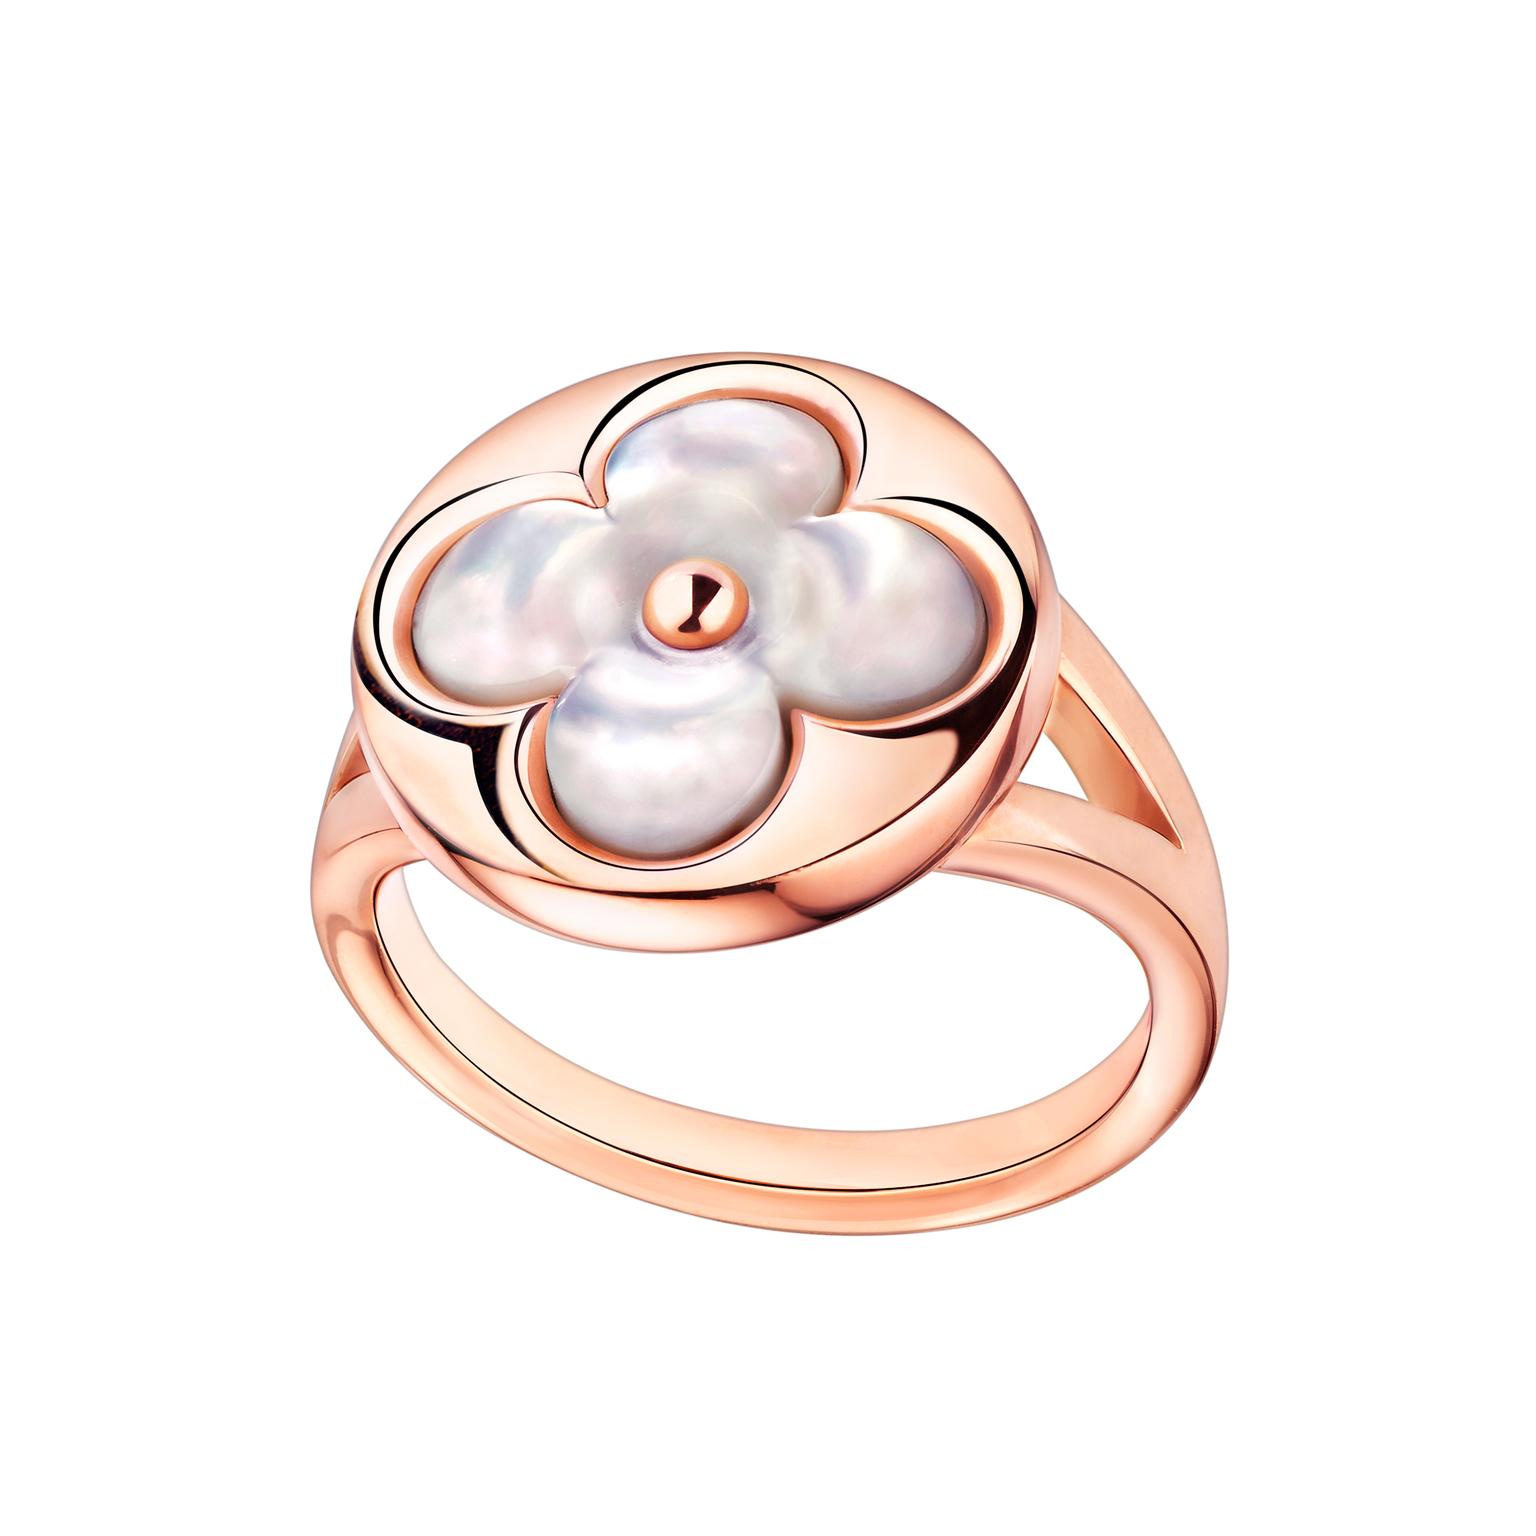 Louis Vuitton Blossom Ring 373845